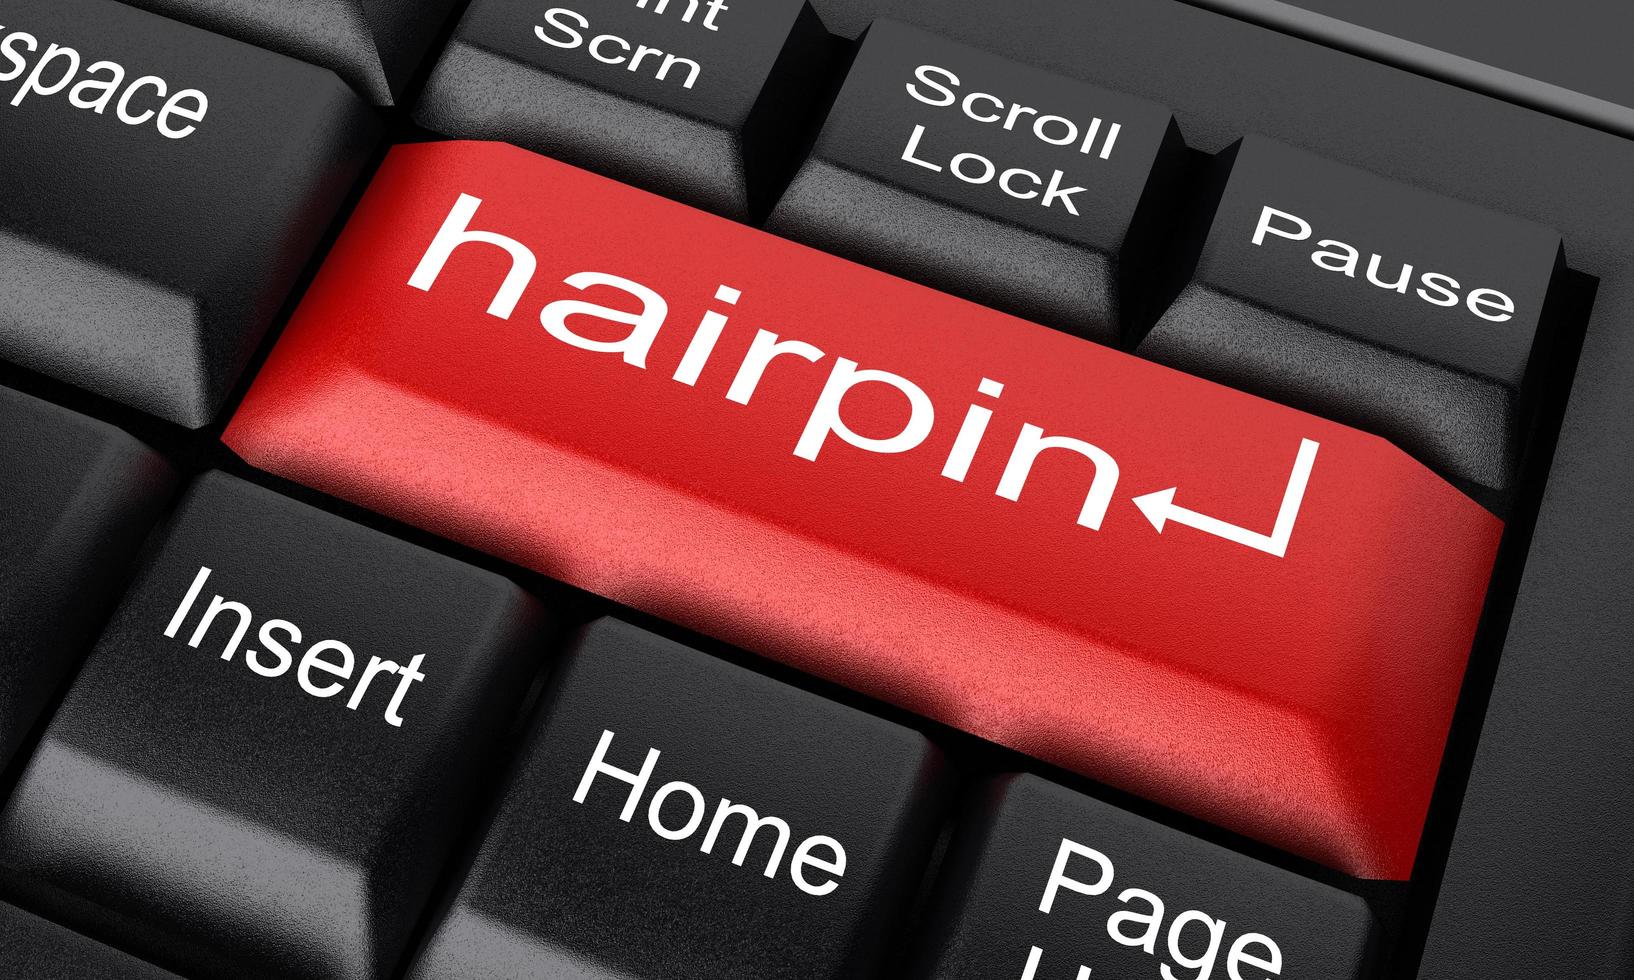 hairpin word on red keyboard button photo